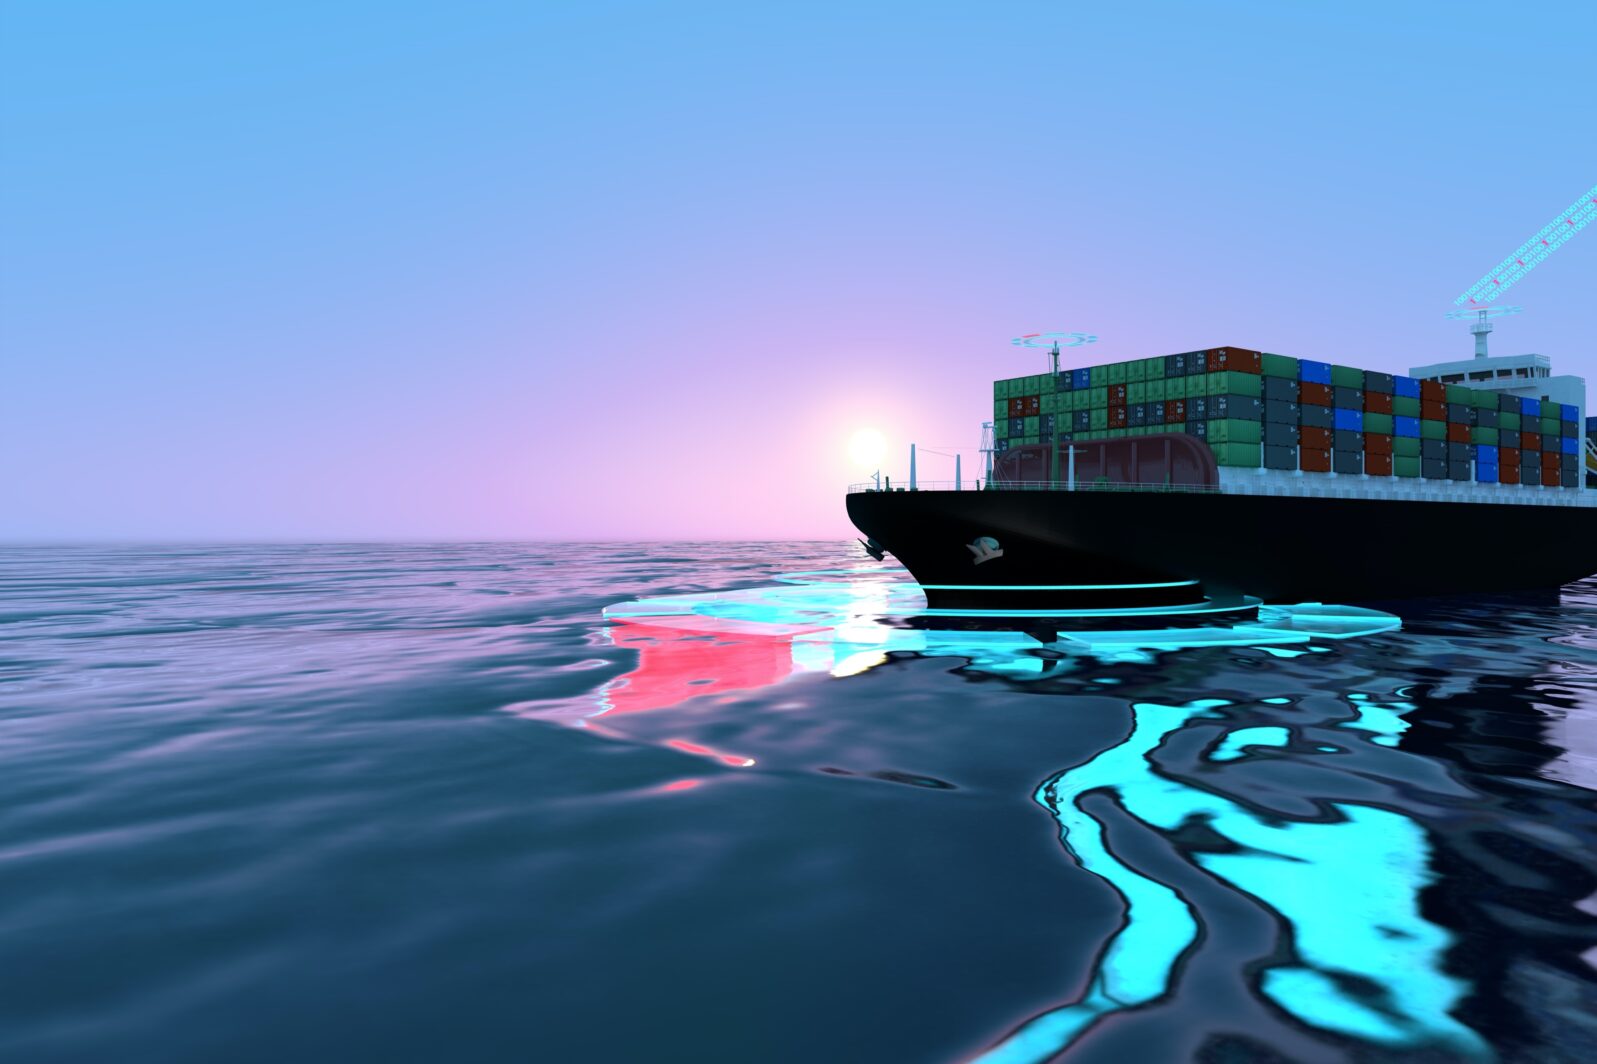 3D illustration of an autonomous shipping vessel controlled remotely by artificial intelligence software managed by sensors on the shipping freight